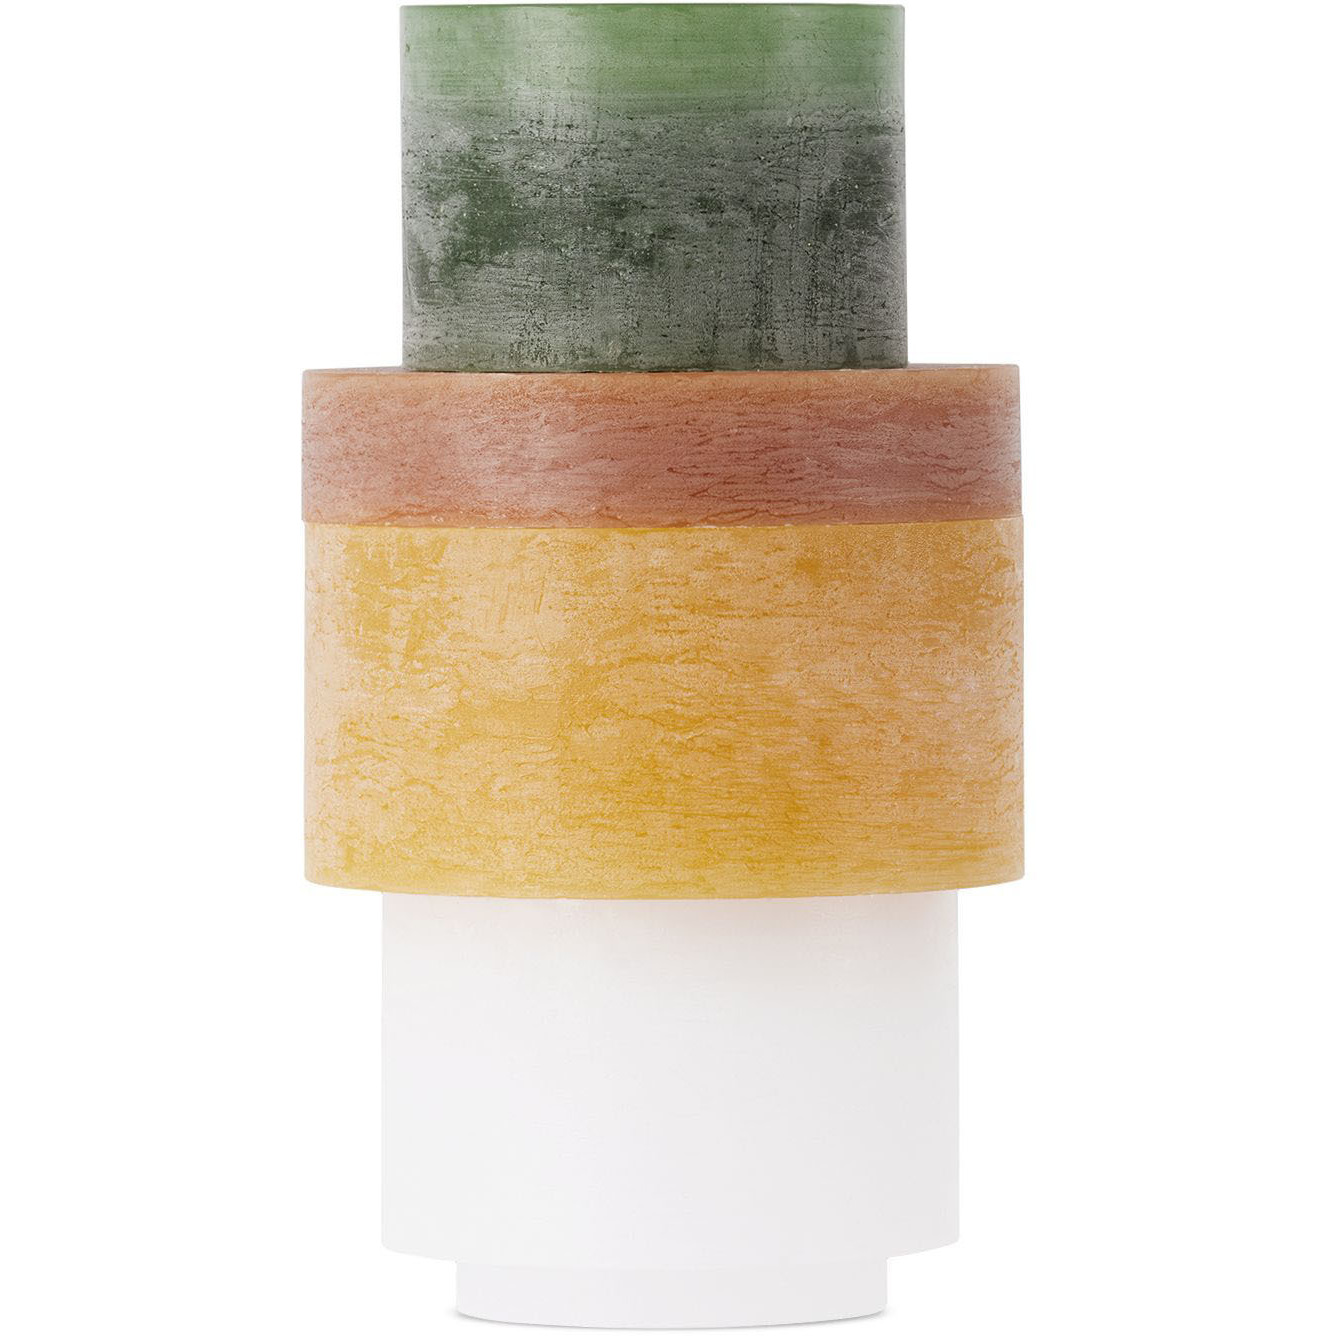 Stan Editions Yellow & Green Stack 05 Candle Set - image 1